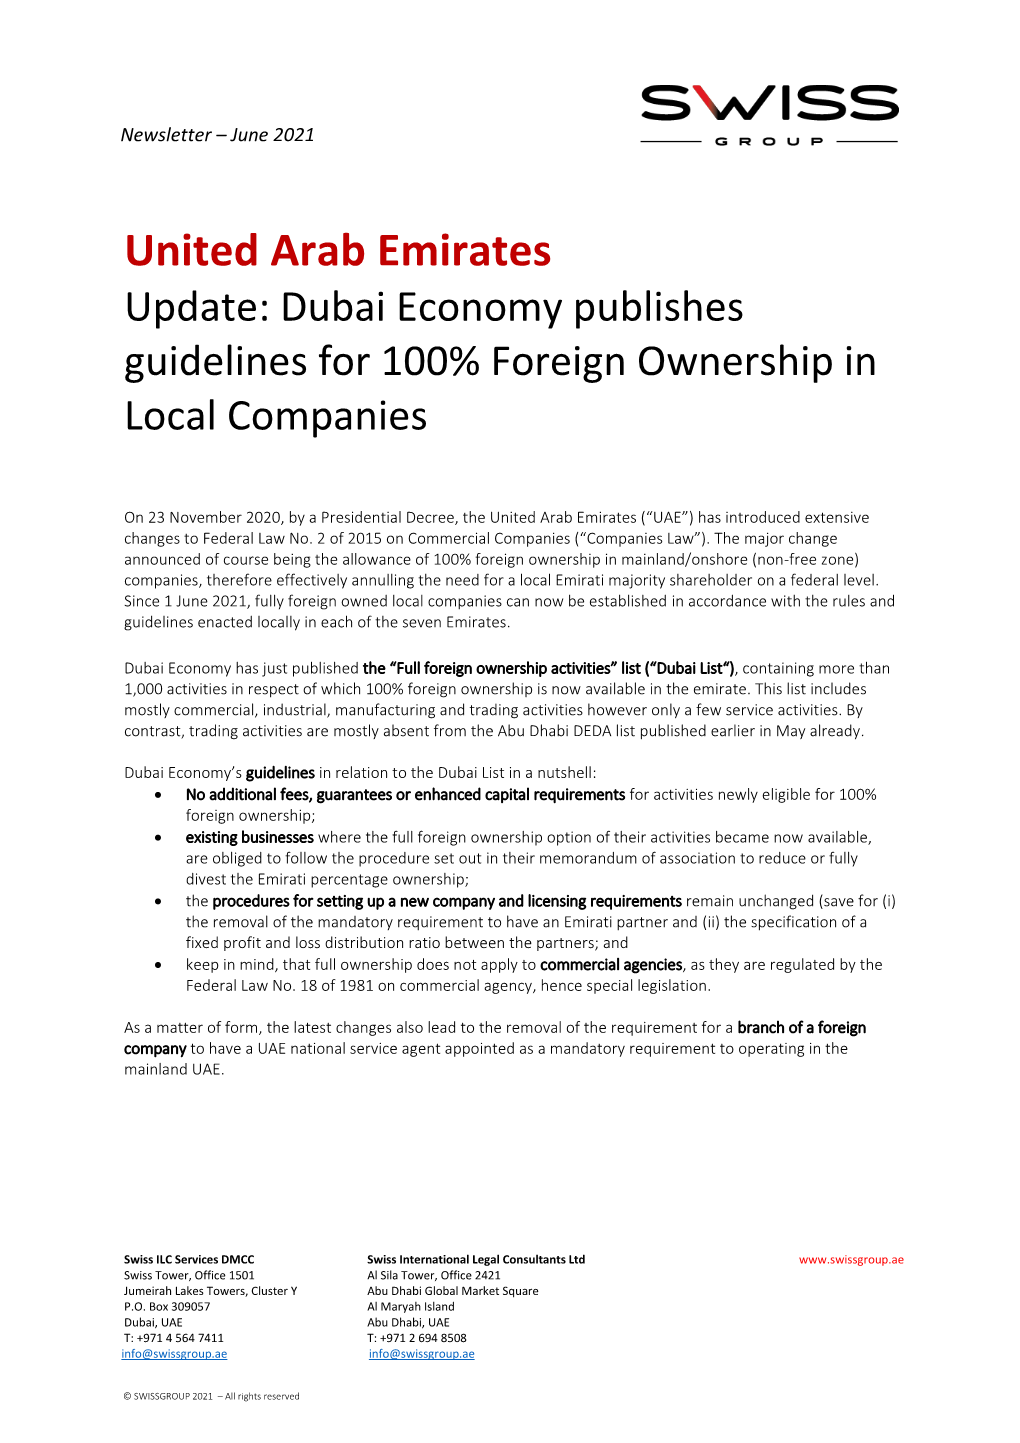 United Arab Emirates Update: Dubai Economy Publishes Guidelines for 100% Foreign Ownership In